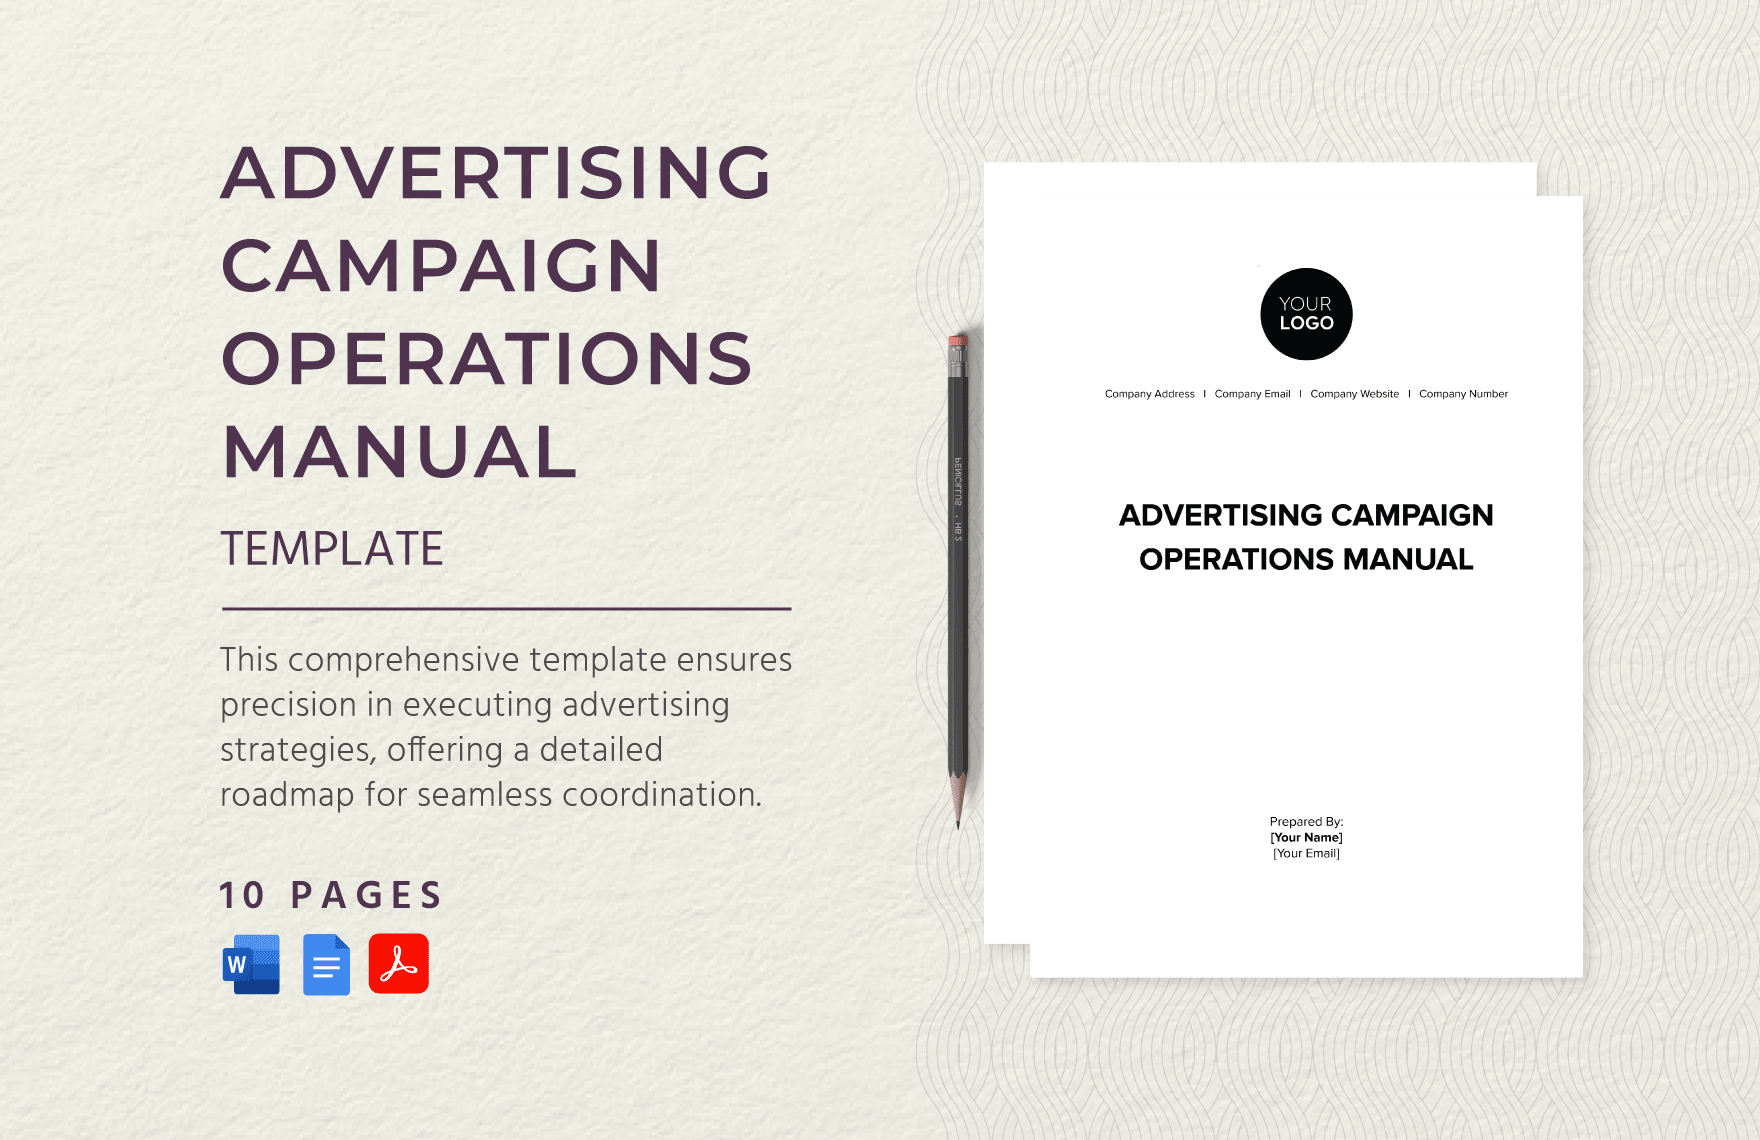 Advertising Campaign Operations Manual Template in Word, Google Docs